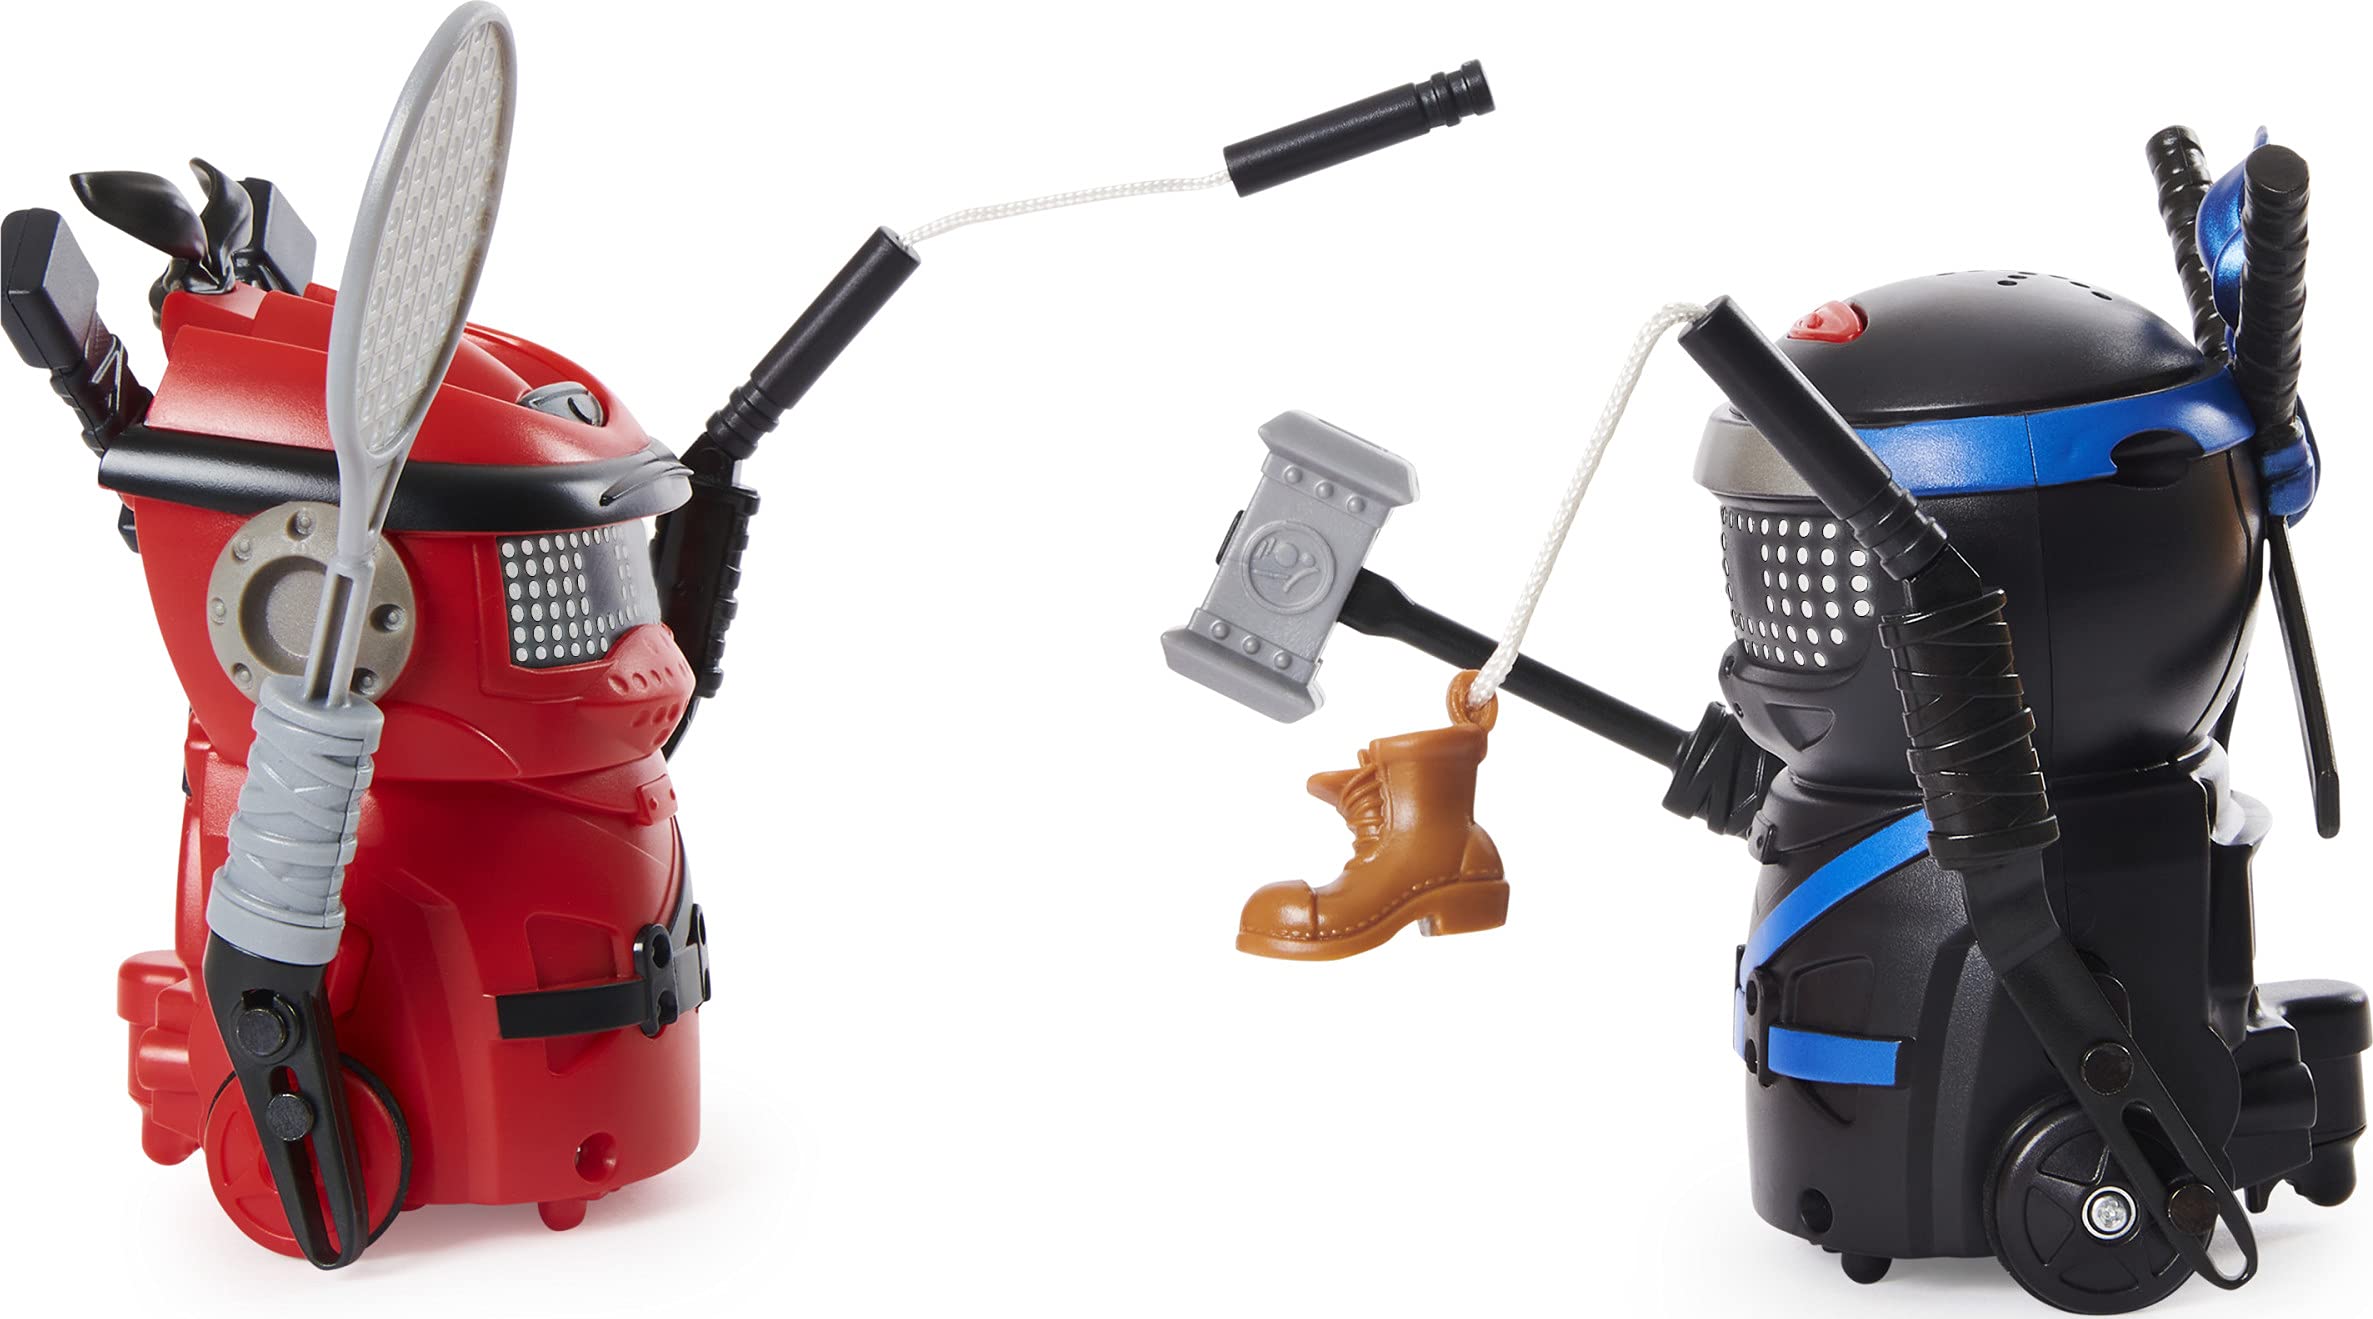 Ninja Bots Dragon 2-Pack, Hilarious Battling Robots (Red/Black) with 6 Weapons and Over 100 Sounds and Movements